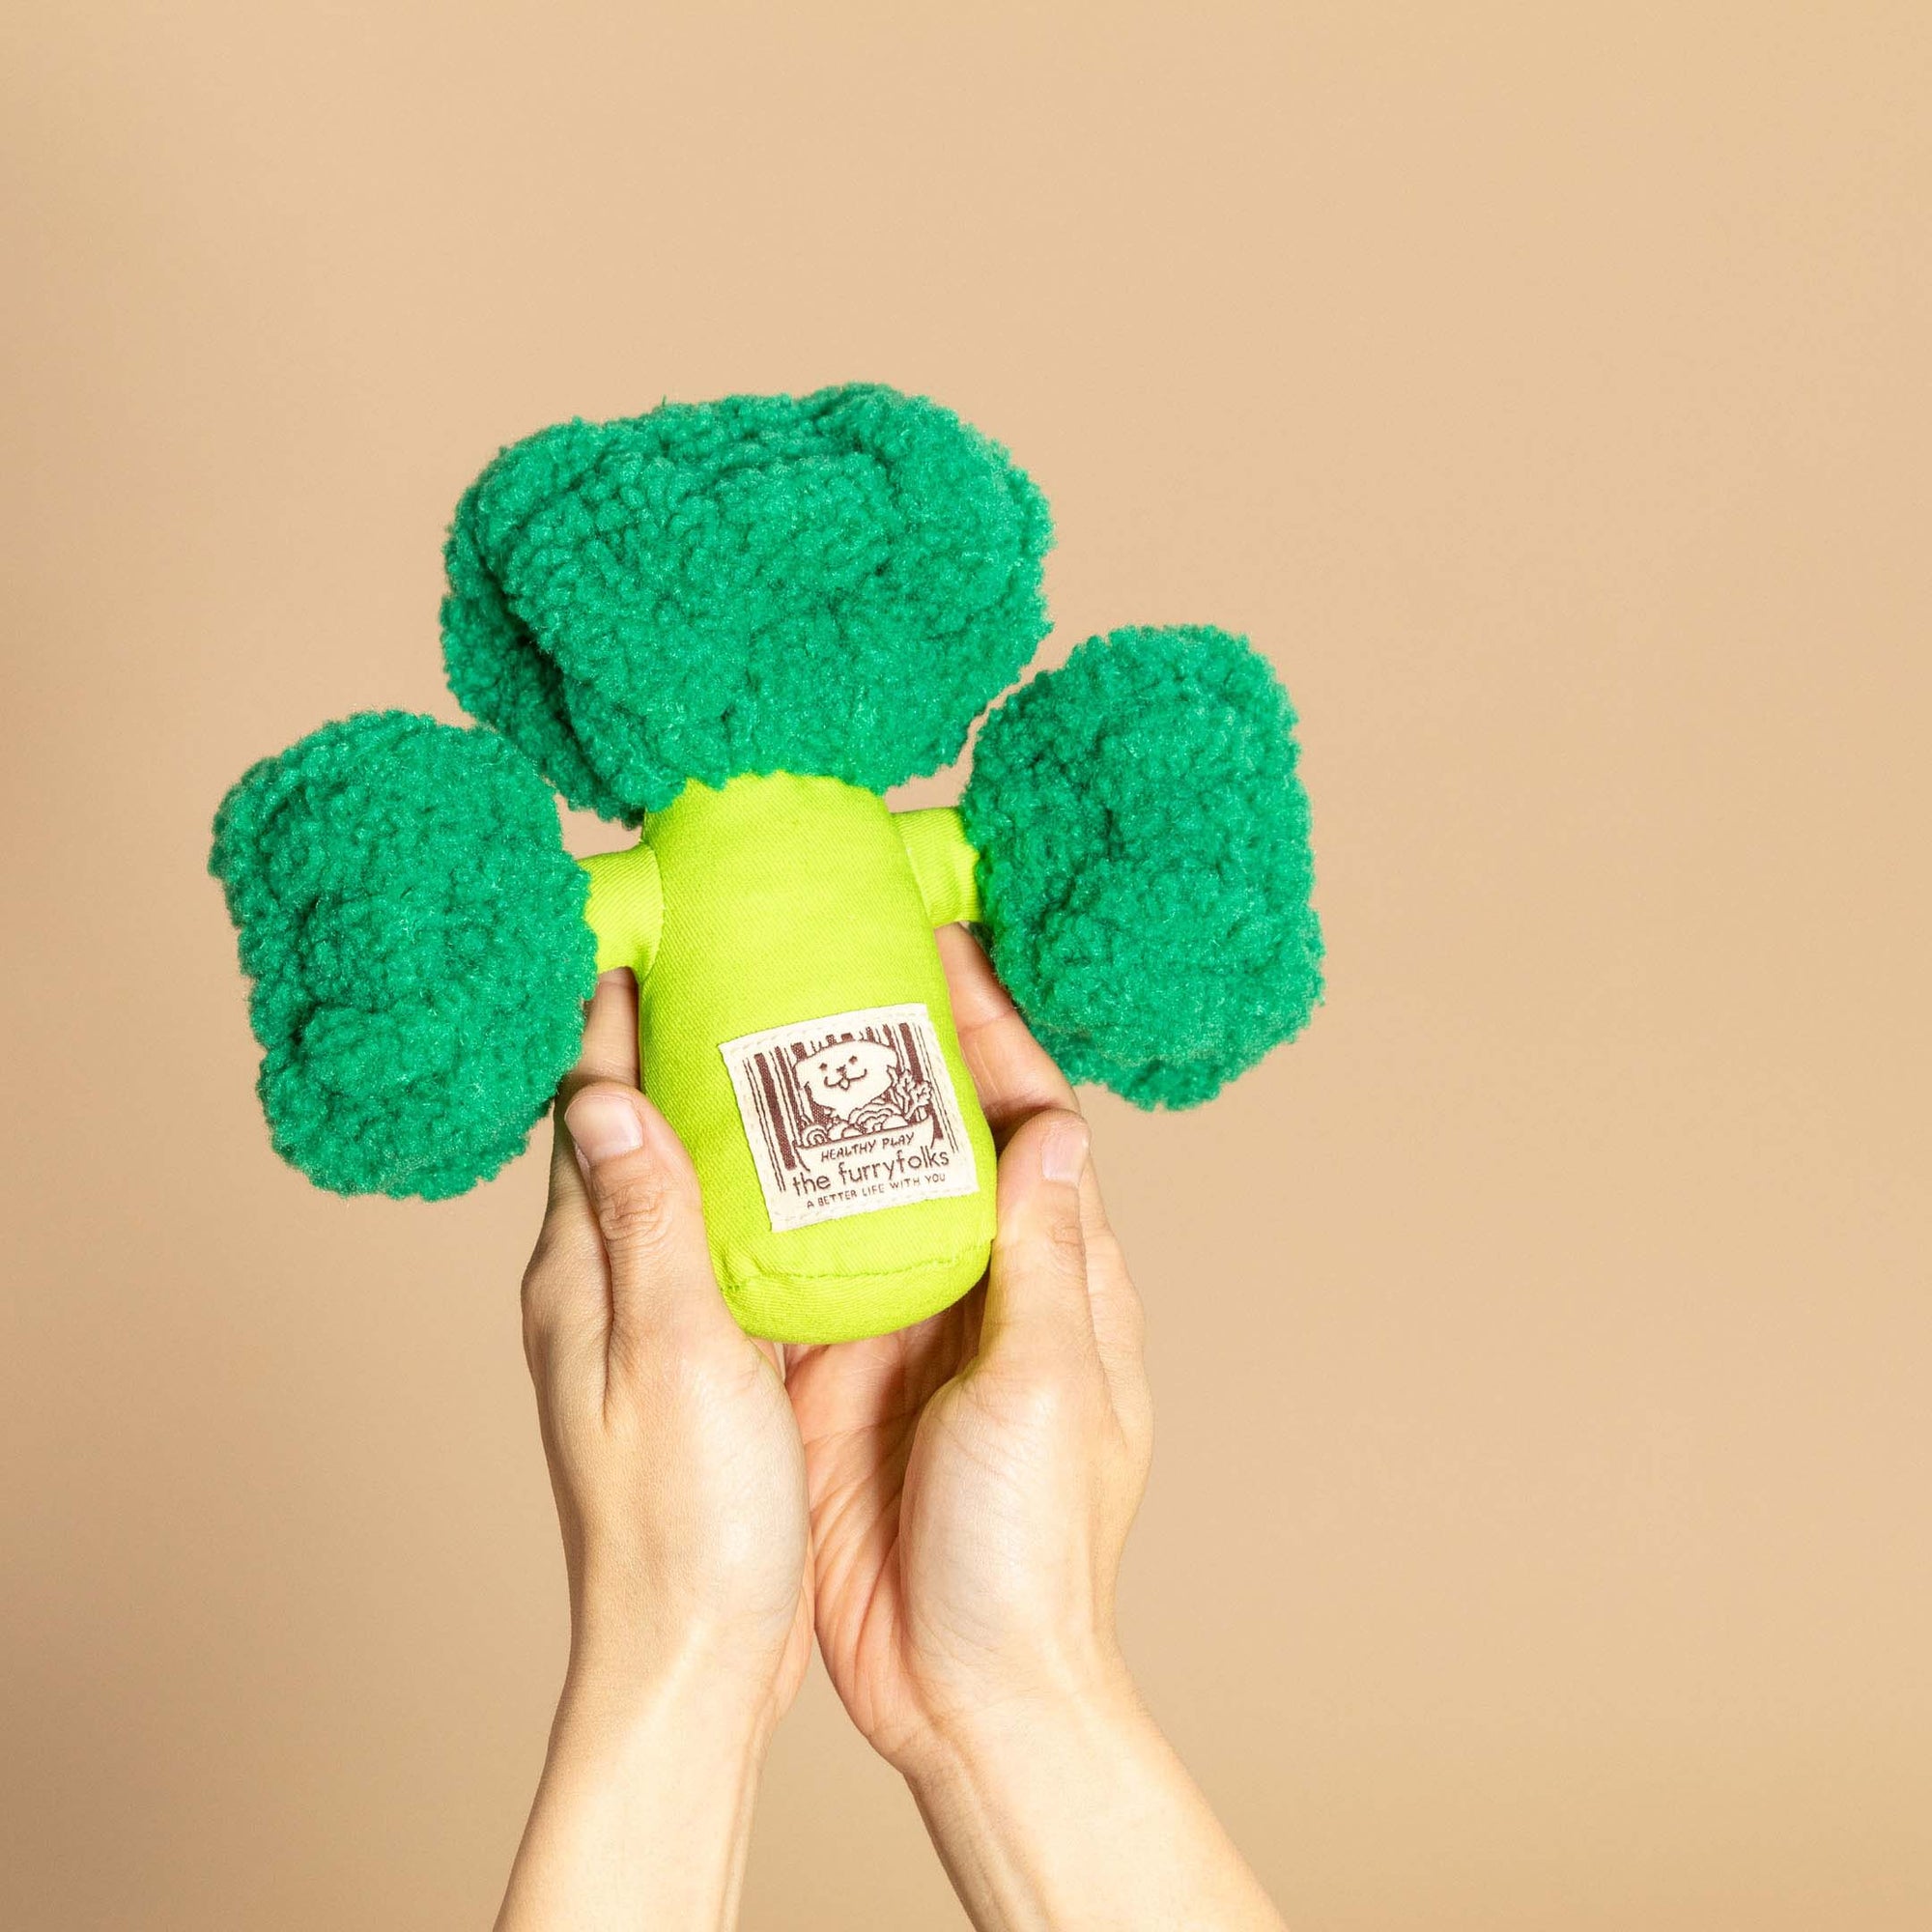 Hands holding up a plush broccoli dog toy against a tan background.